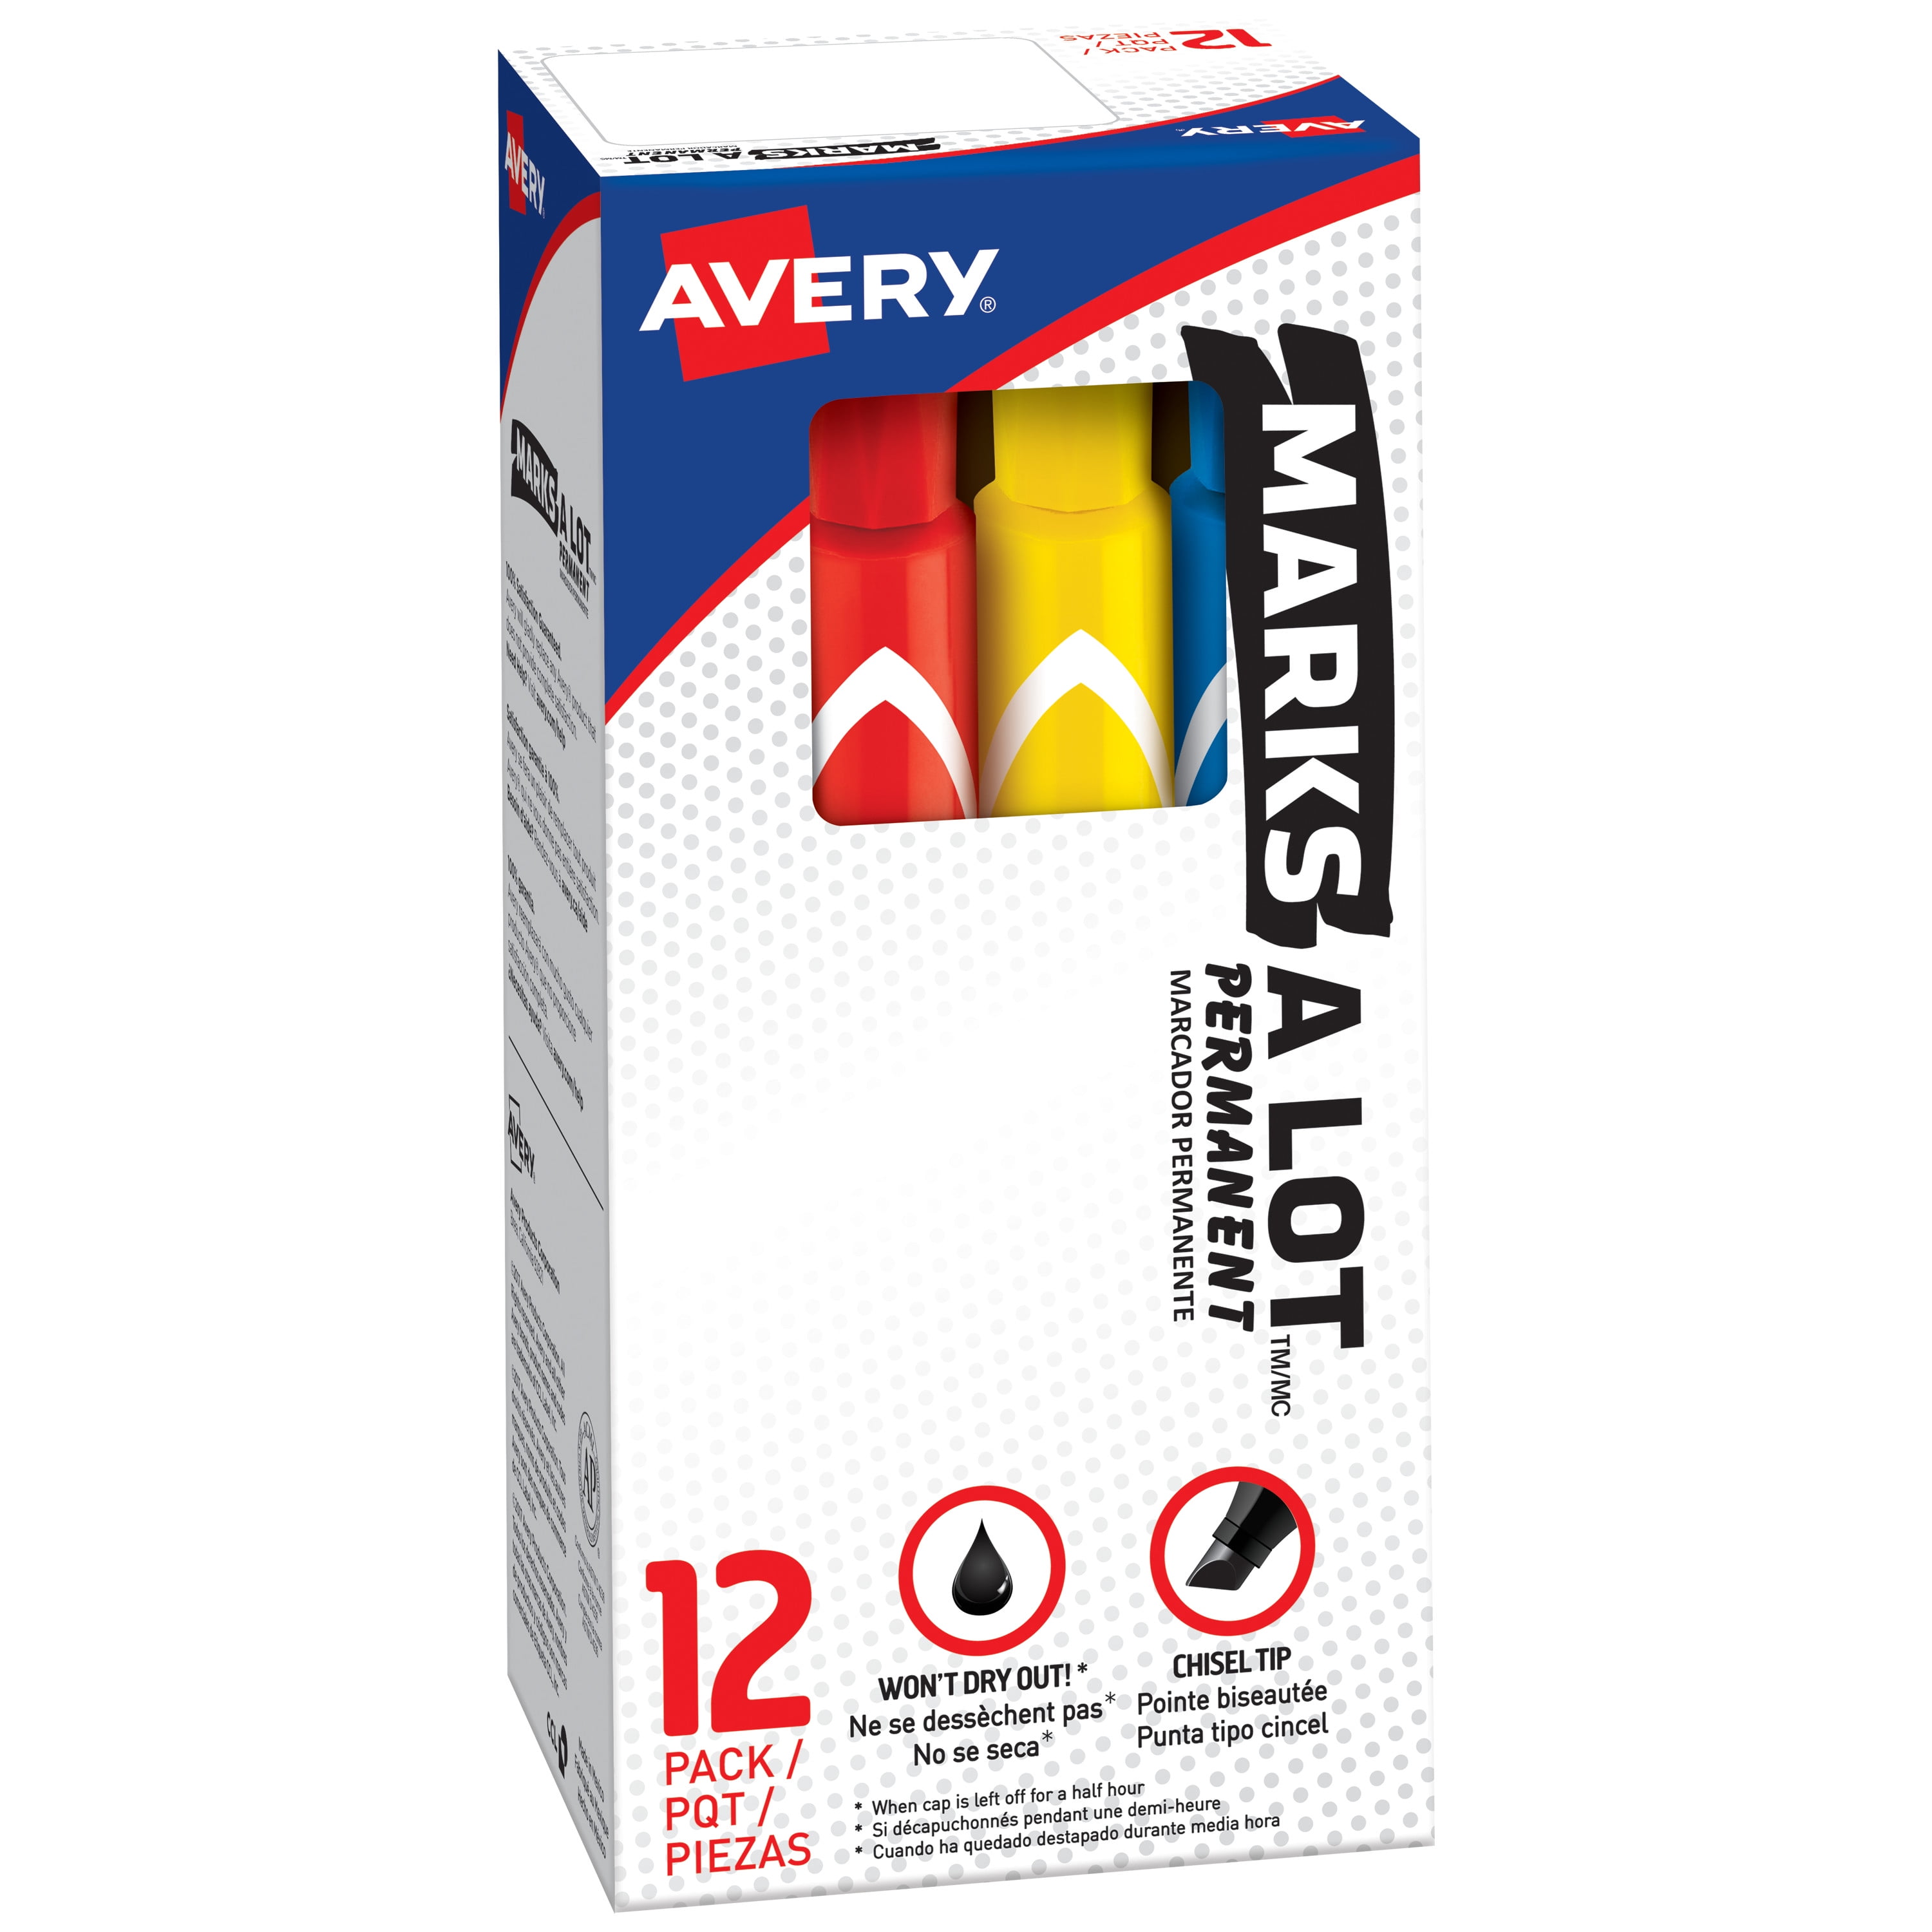 Avery Permanent Markers, Large Desk-Style Size, Chisel Tip, 2 Black Markers  (18922) - AVE18922 